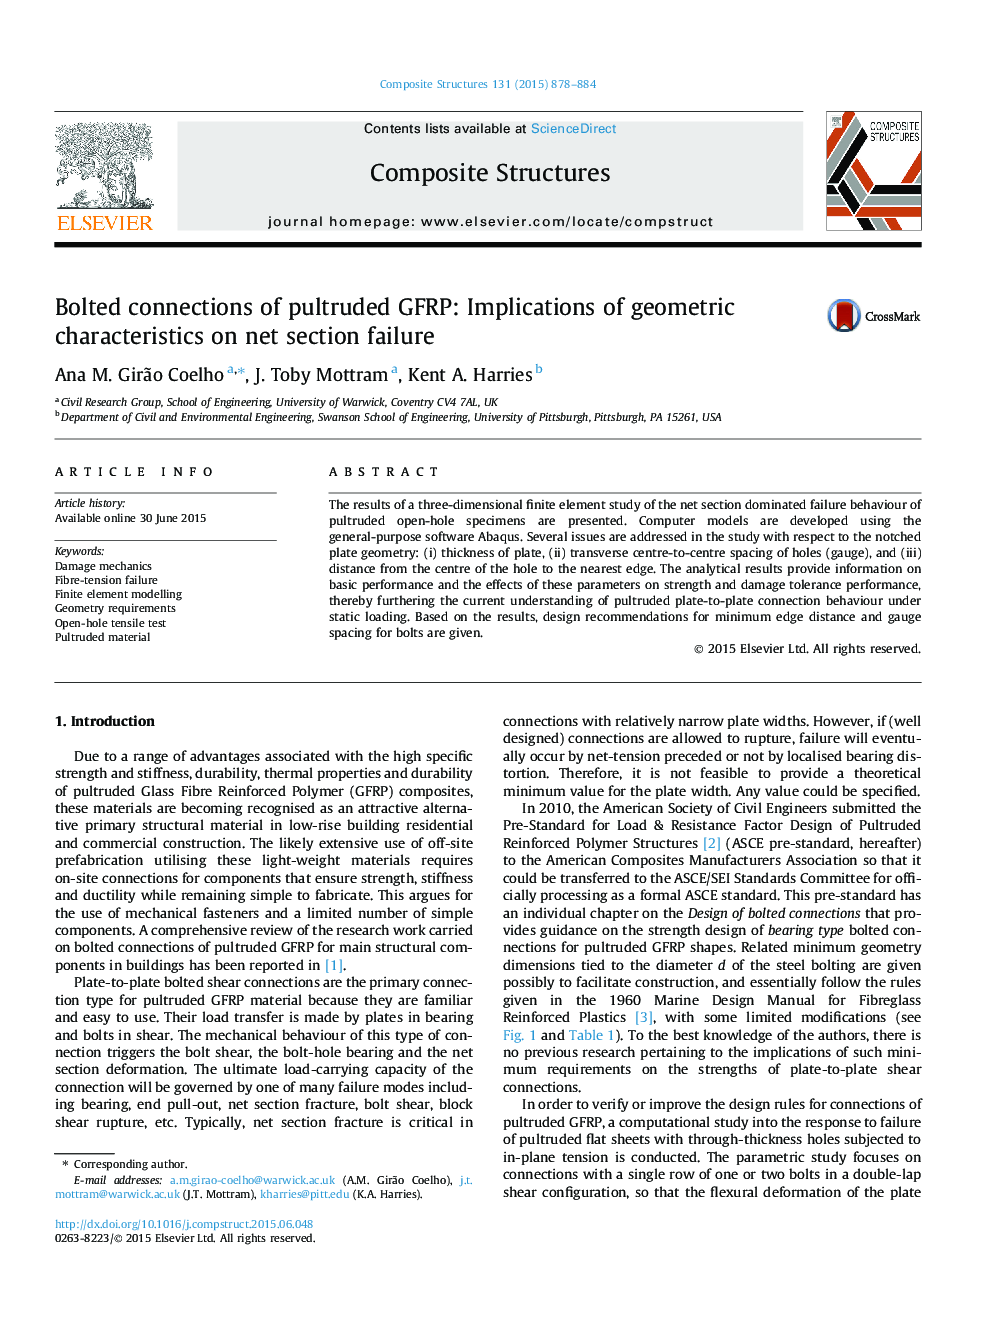 Bolted connections of pultruded GFRP: Implications of geometric characteristics on net section failure